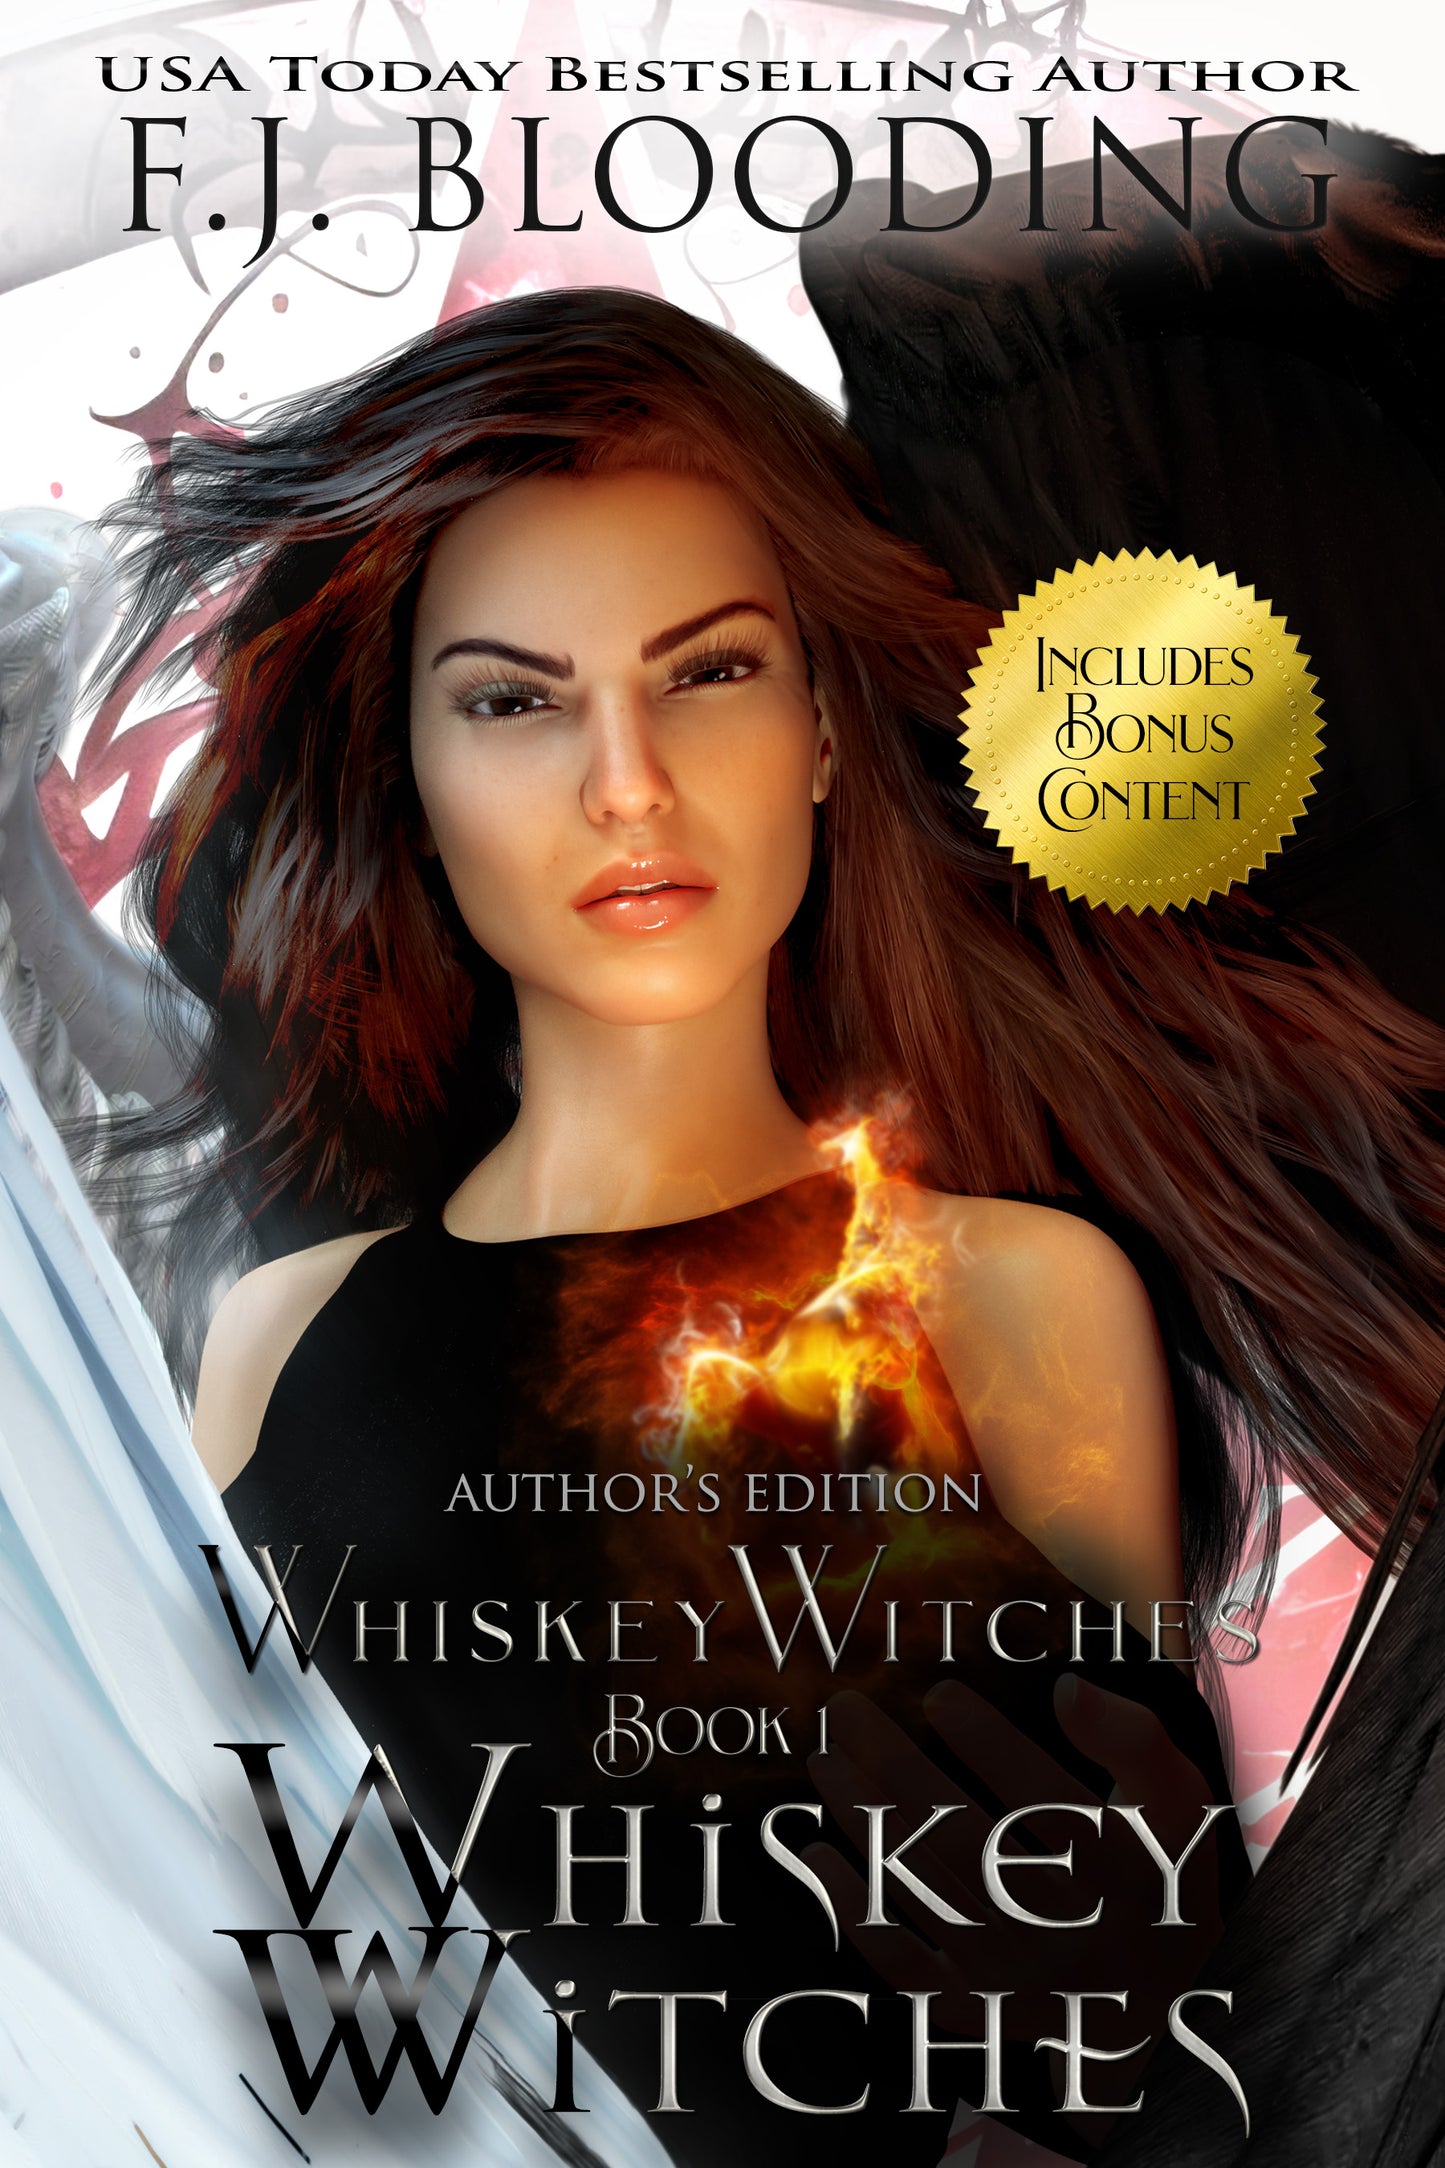 1.1 Whiskey Witches